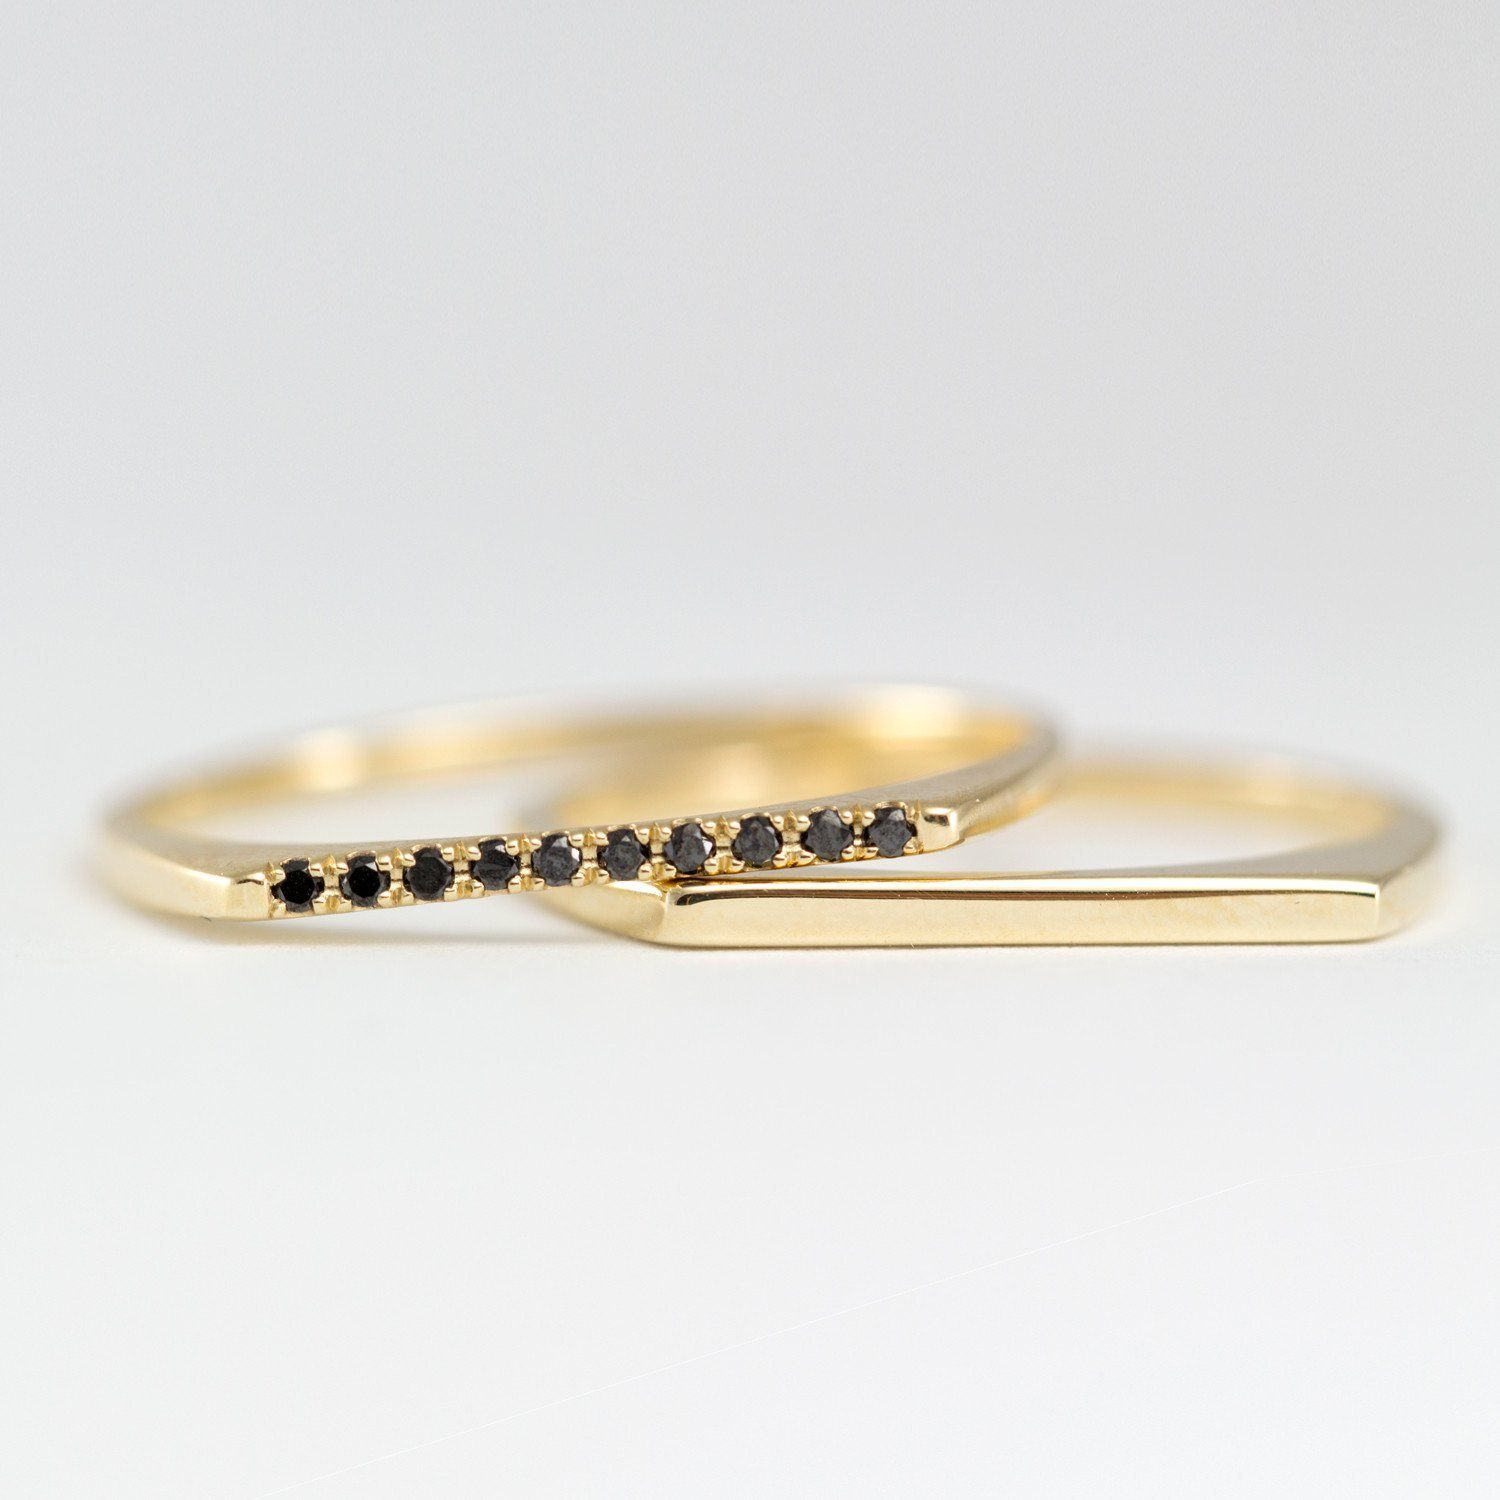 thin gold ring with 10 black diamonds